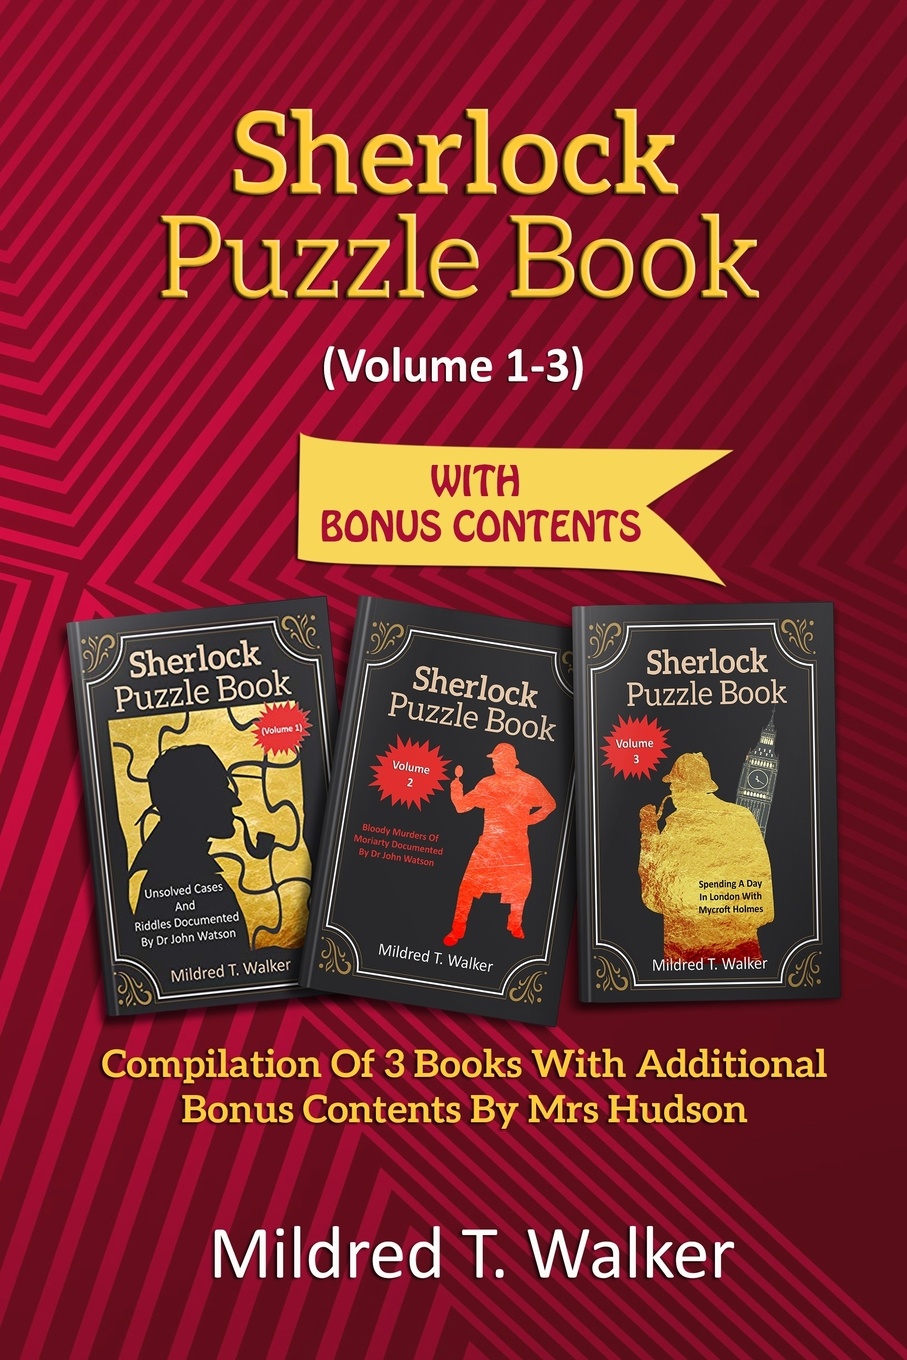 Sherlock Puzzle Book (Volume 1-3). Compilation Of 3 Books With Additional Bonus Contents By Mrs Hudson